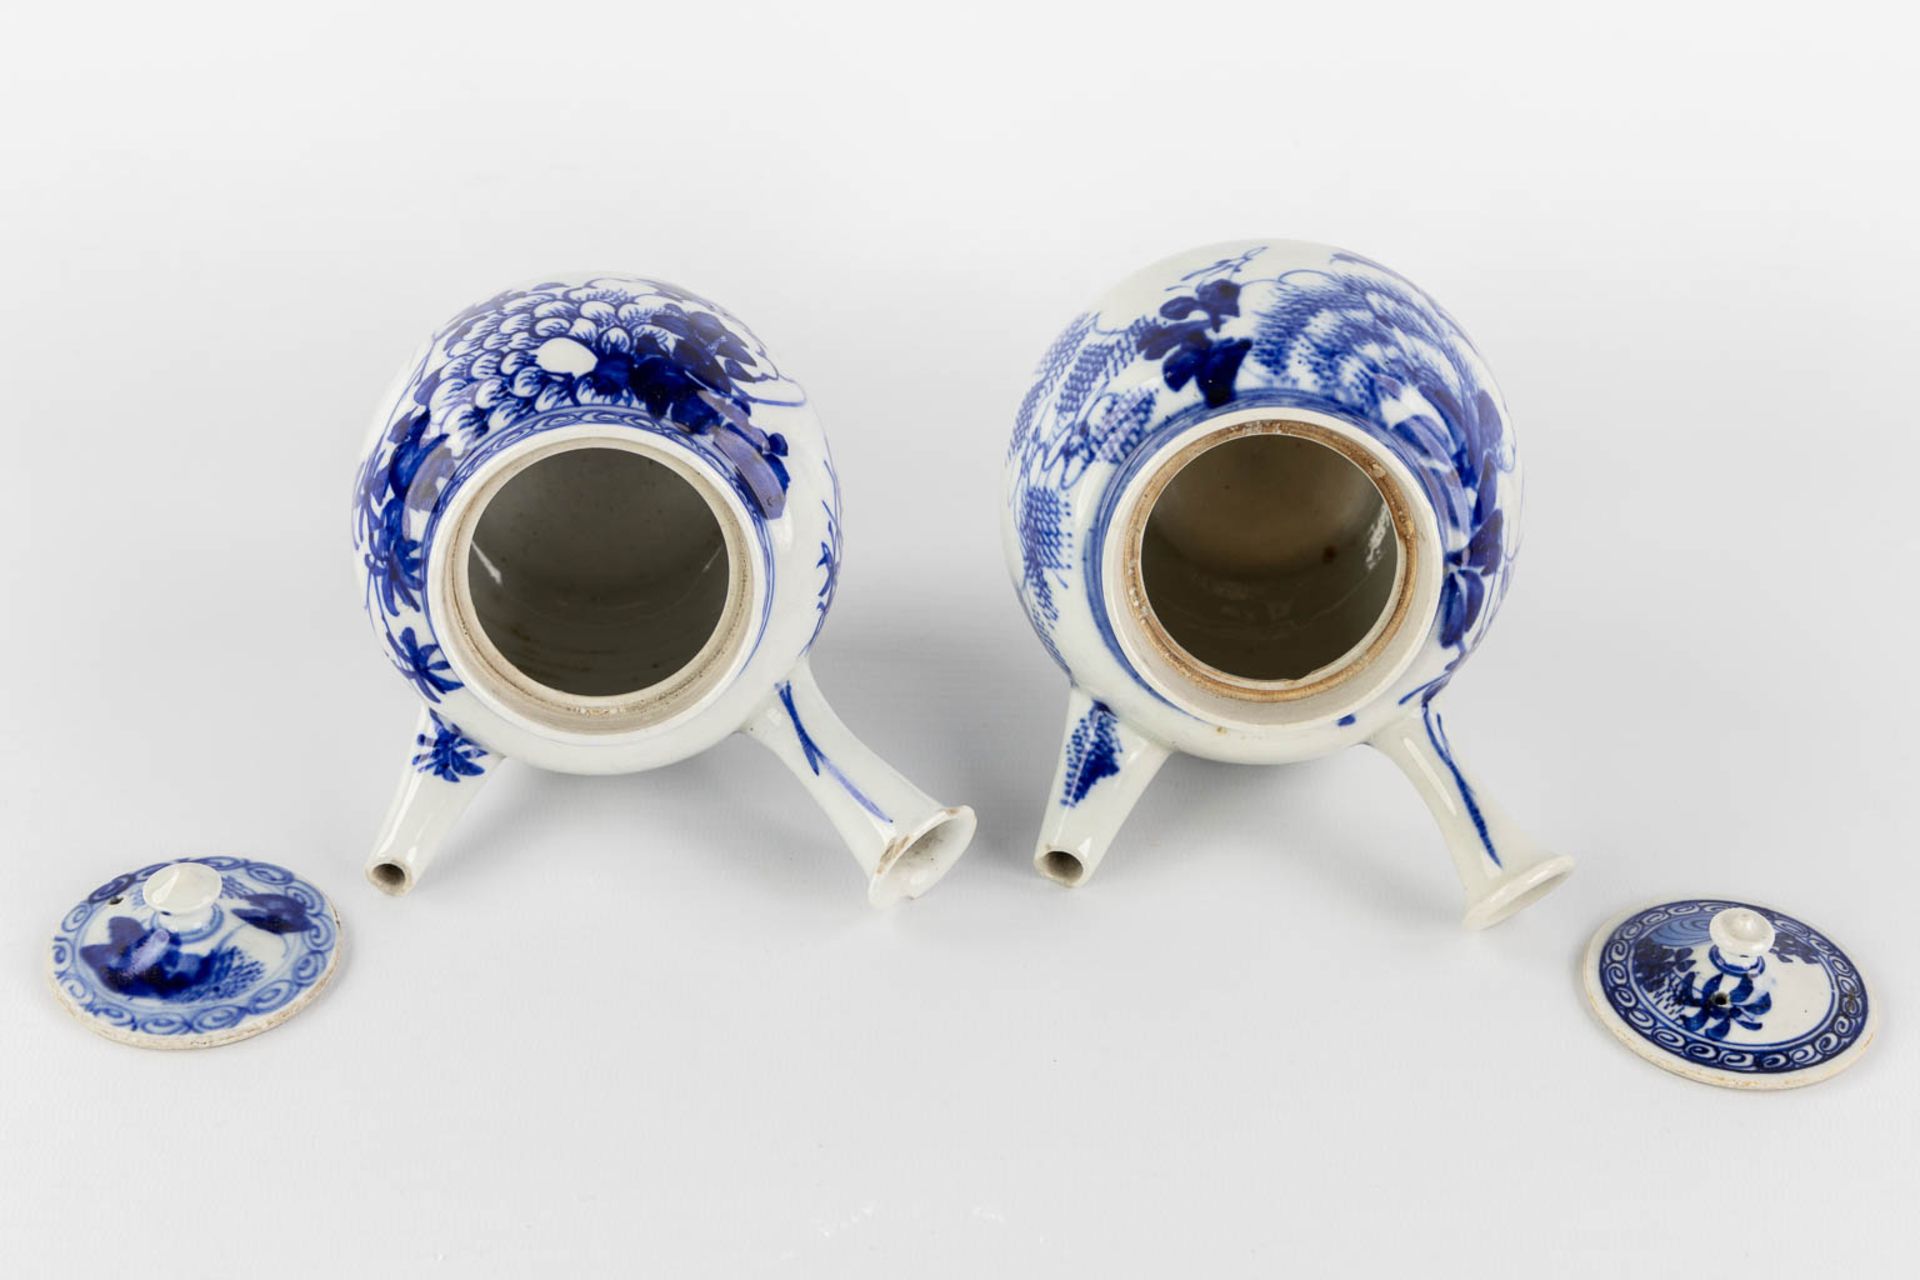 Three Chinese and Japanese teapots, blue-white decor. (W:20 x H:14 cm) - Image 14 of 17